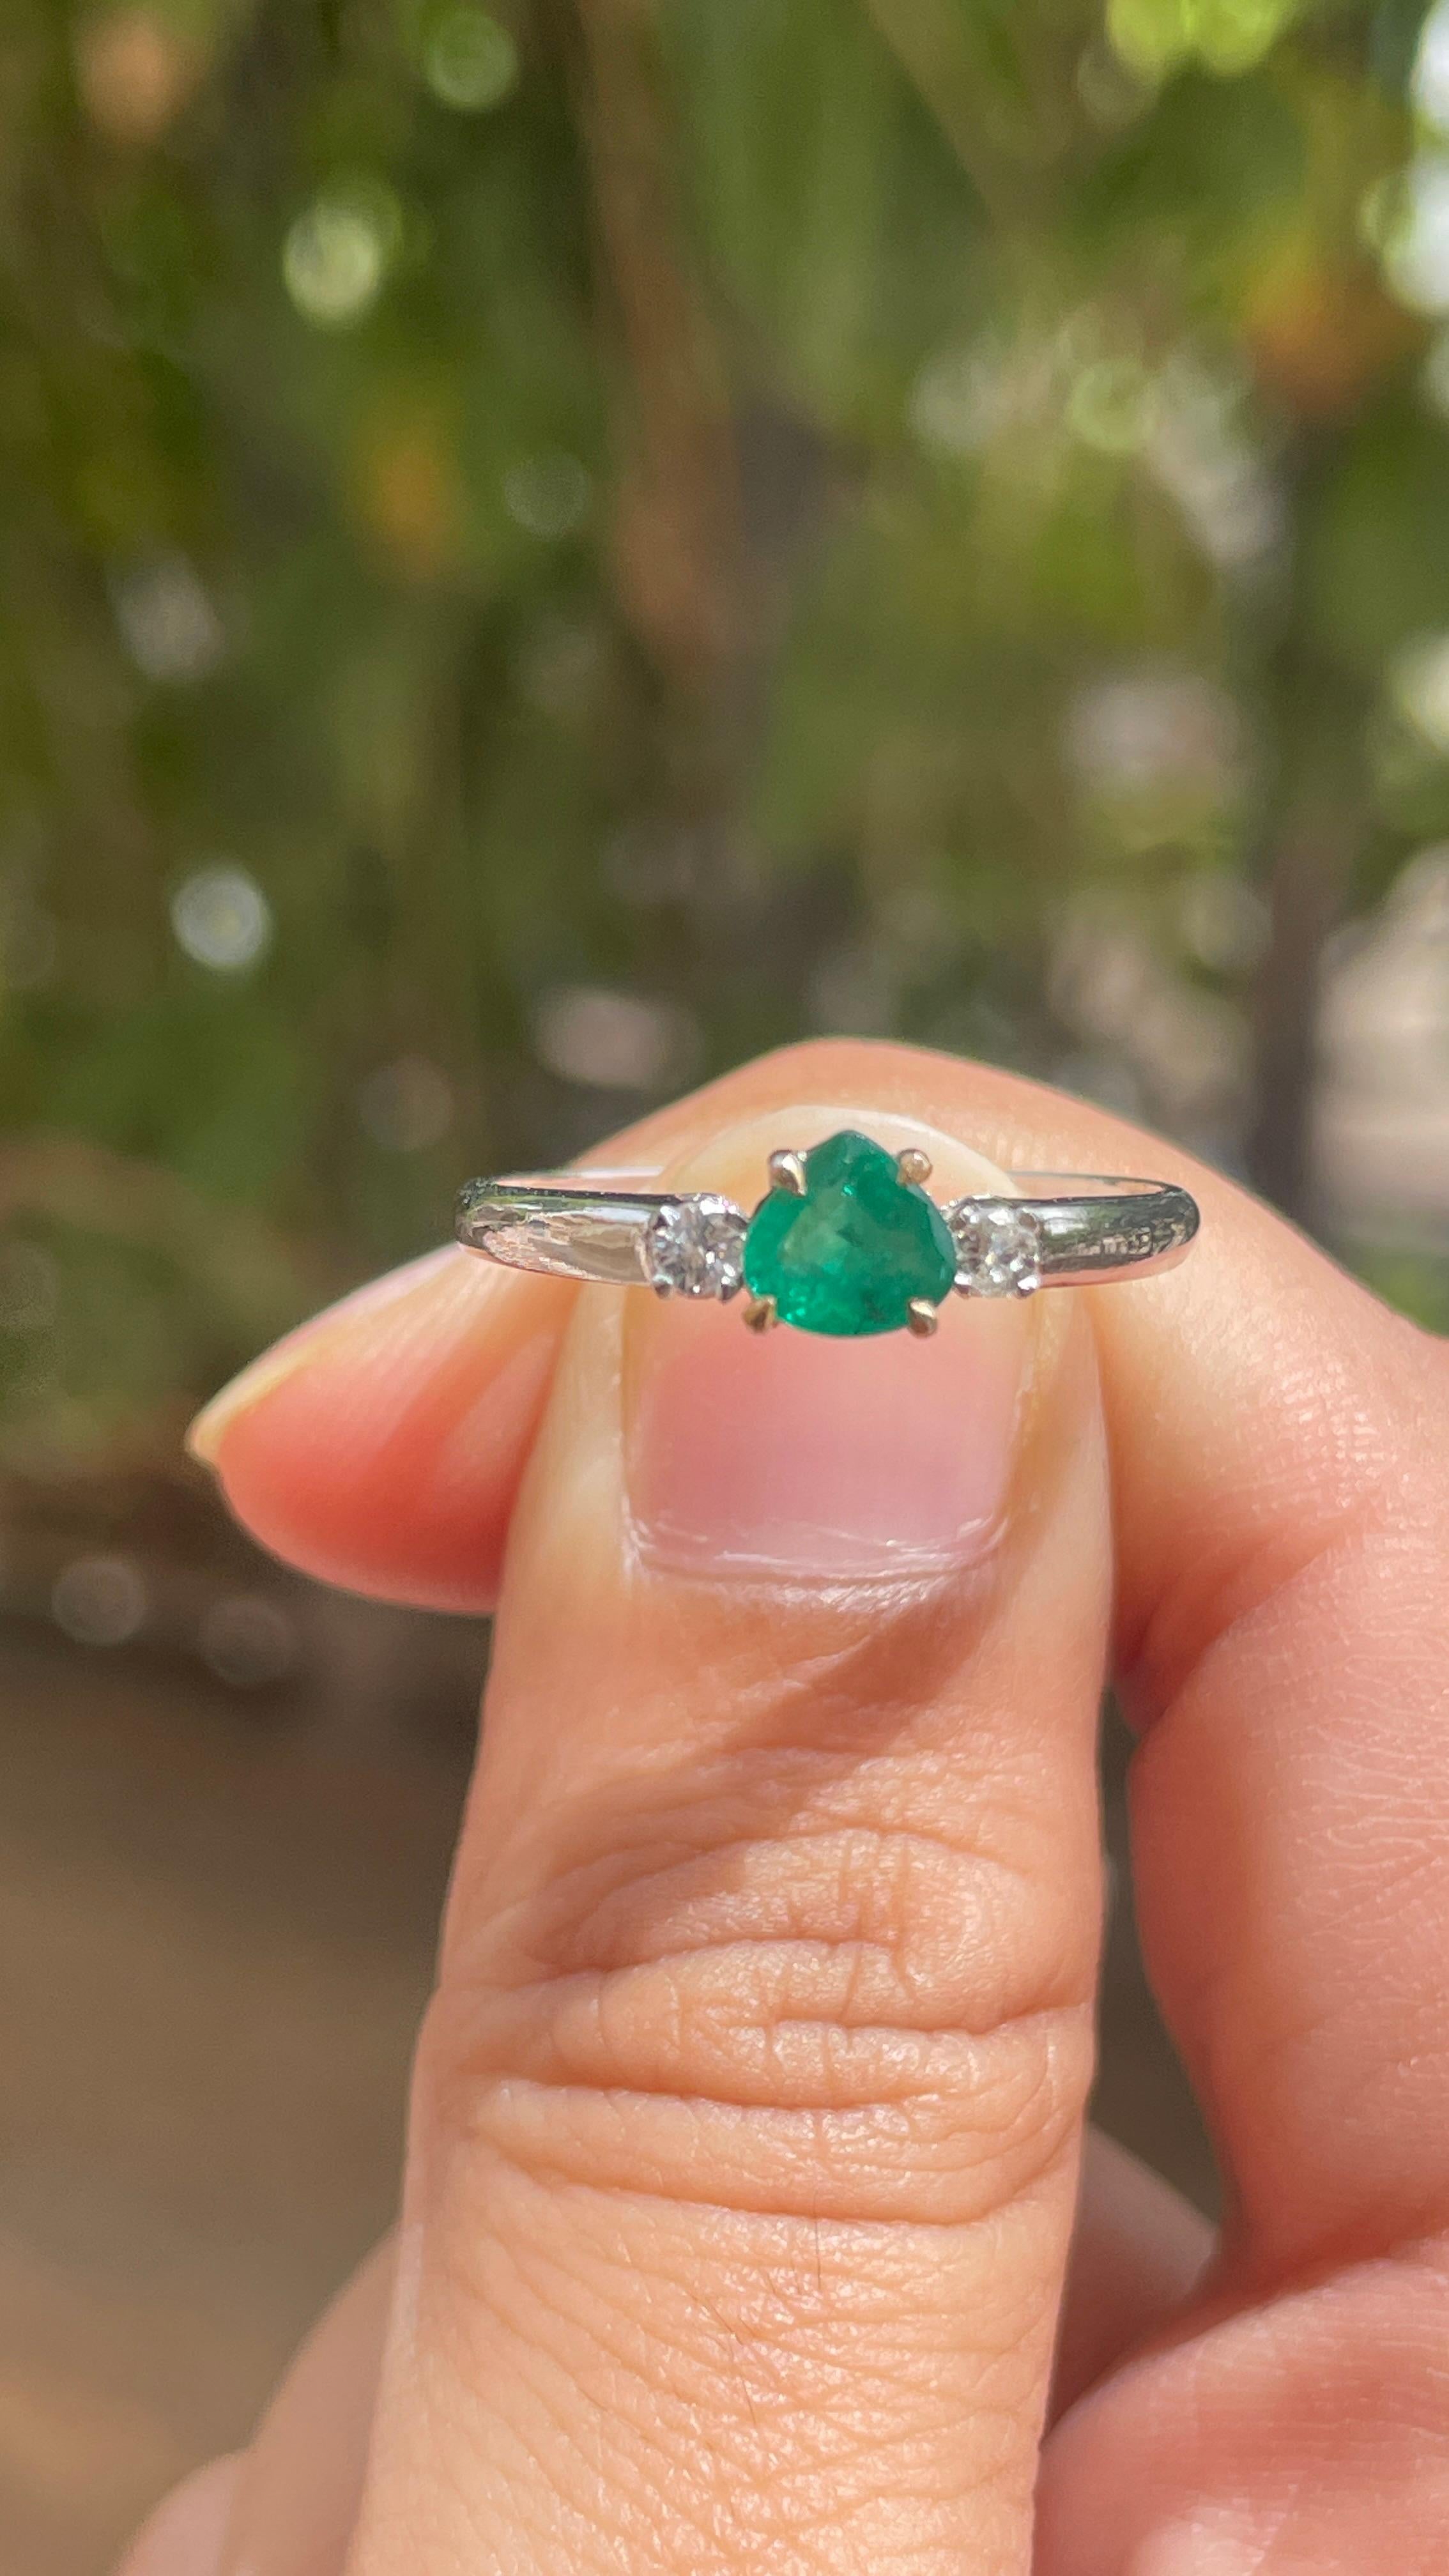 For Sale:  18k Solid White Gold Emerald Ring with Diamonds 2